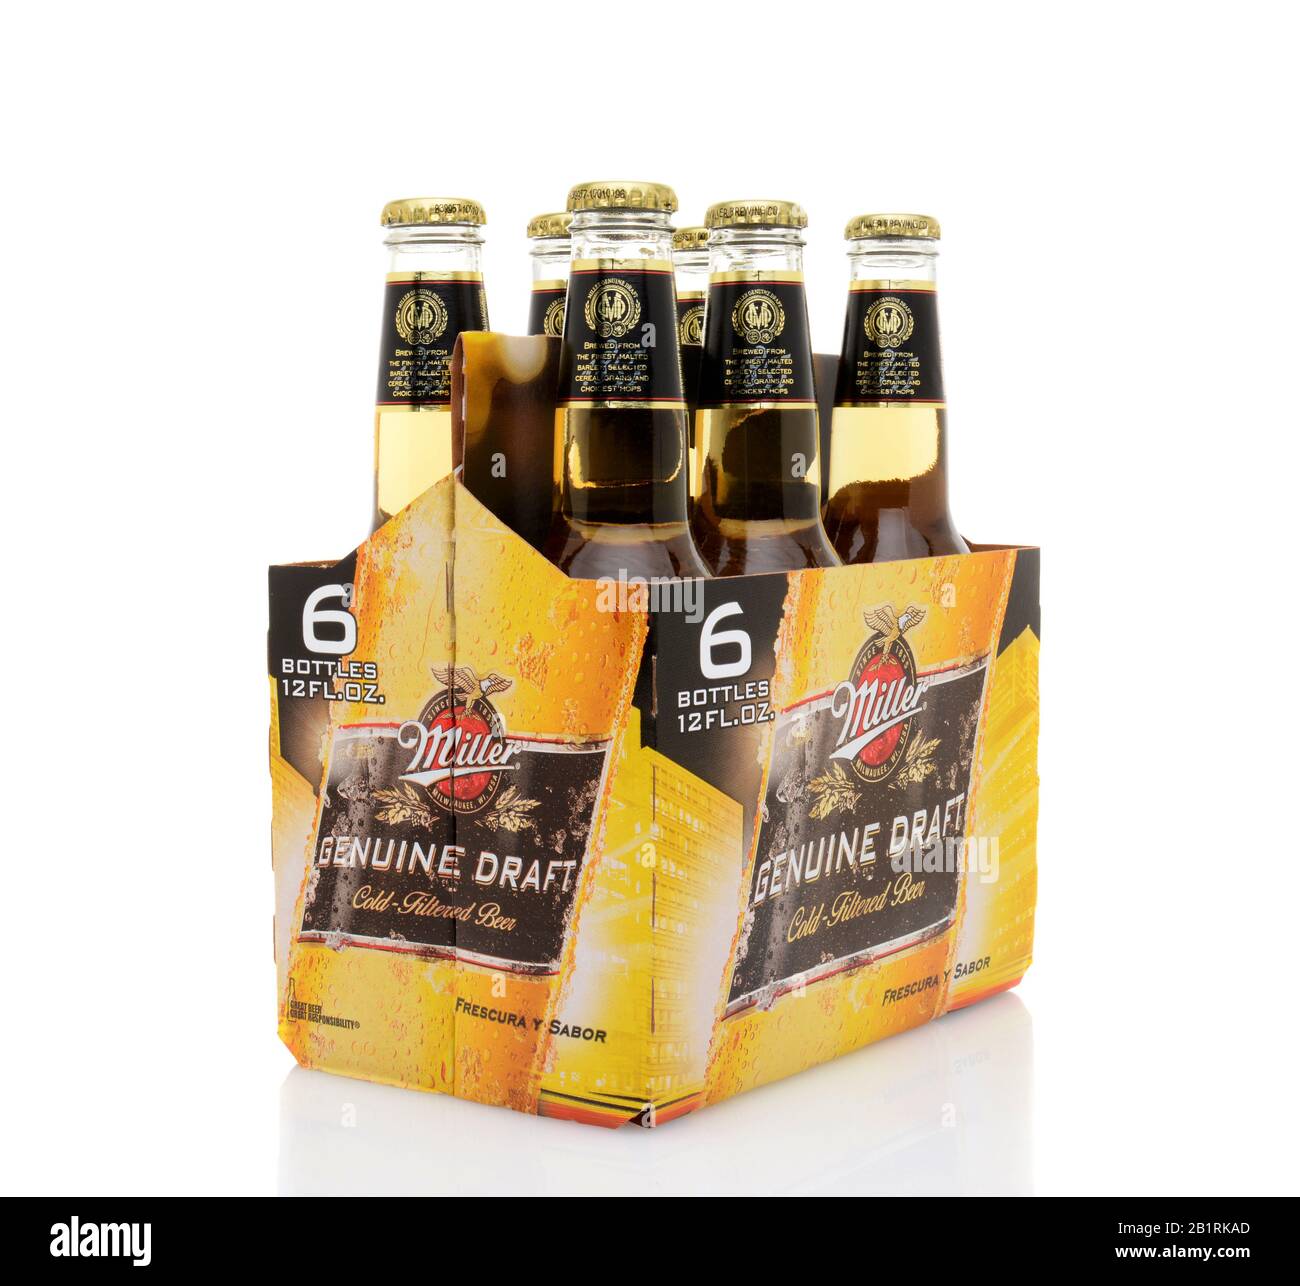 IRVINE, CA - MAY 25, 2014: A 6 pack of Miller Genuine Draft, side view. MGD is actually made from the same recipe as Miller High Life except it is col Stock Photo